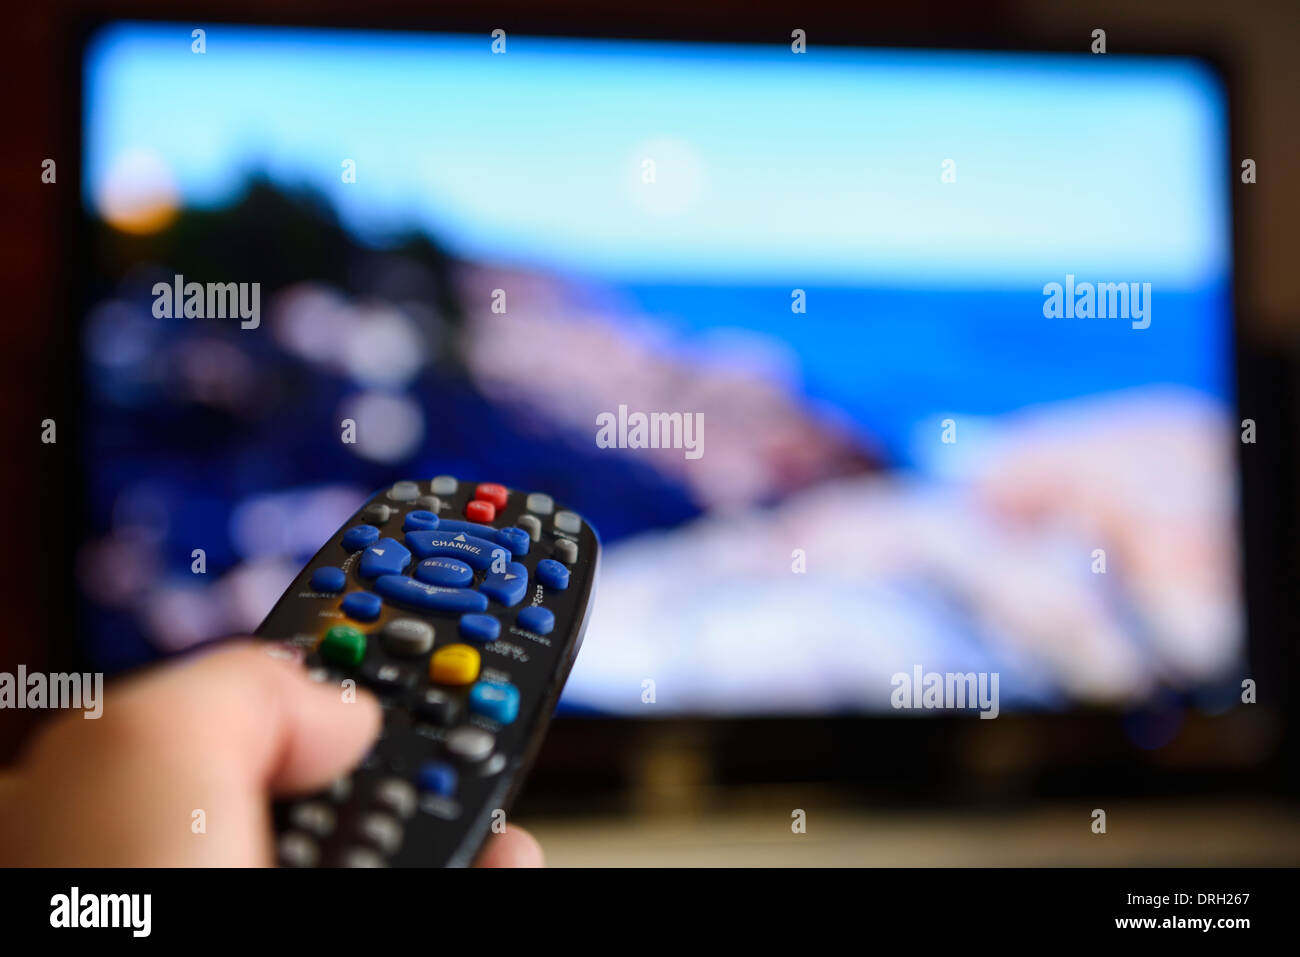 Person pointing a universal remote control towards a television screen entertainment system Stock Photo